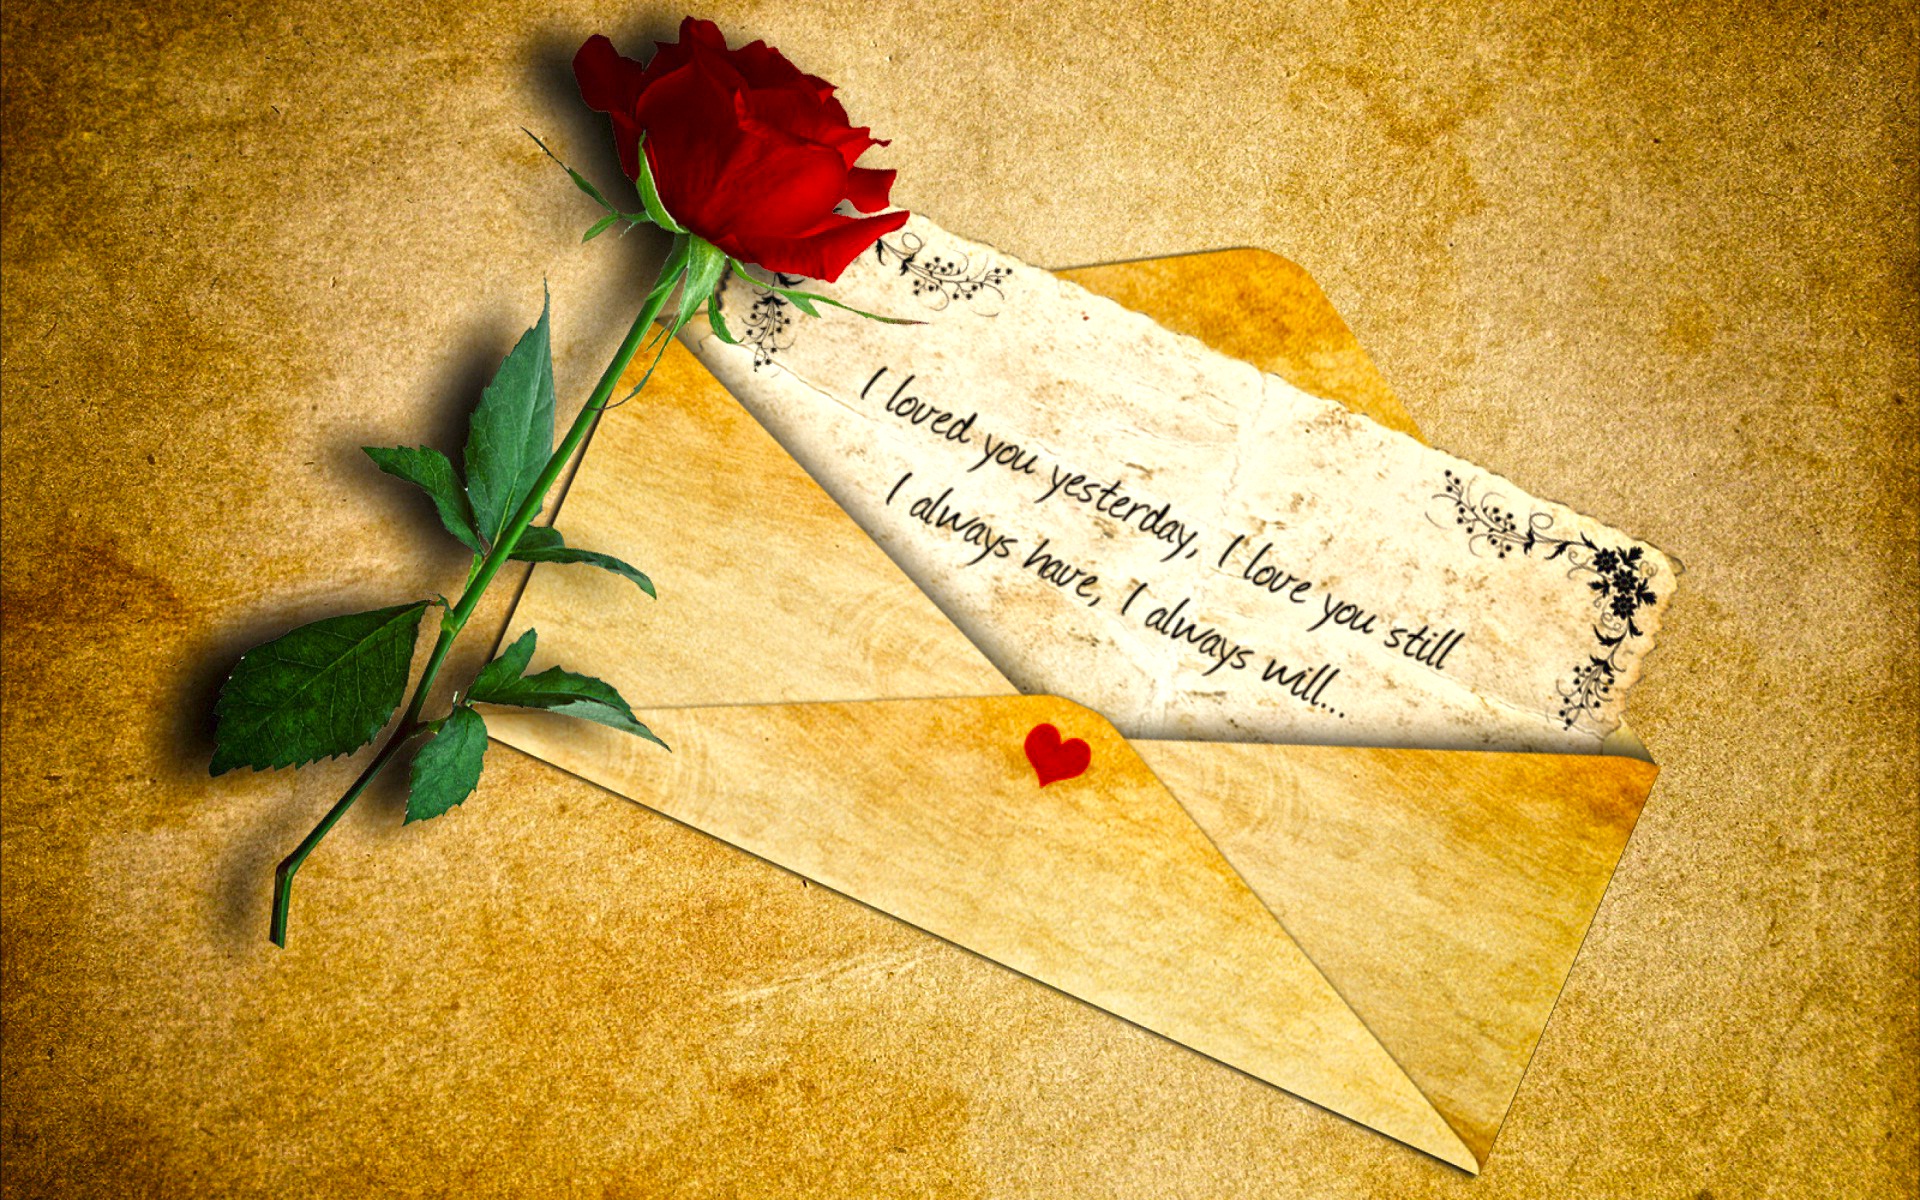 Love letter for my lover HD wallpaper - New hd wallpaperNew hd